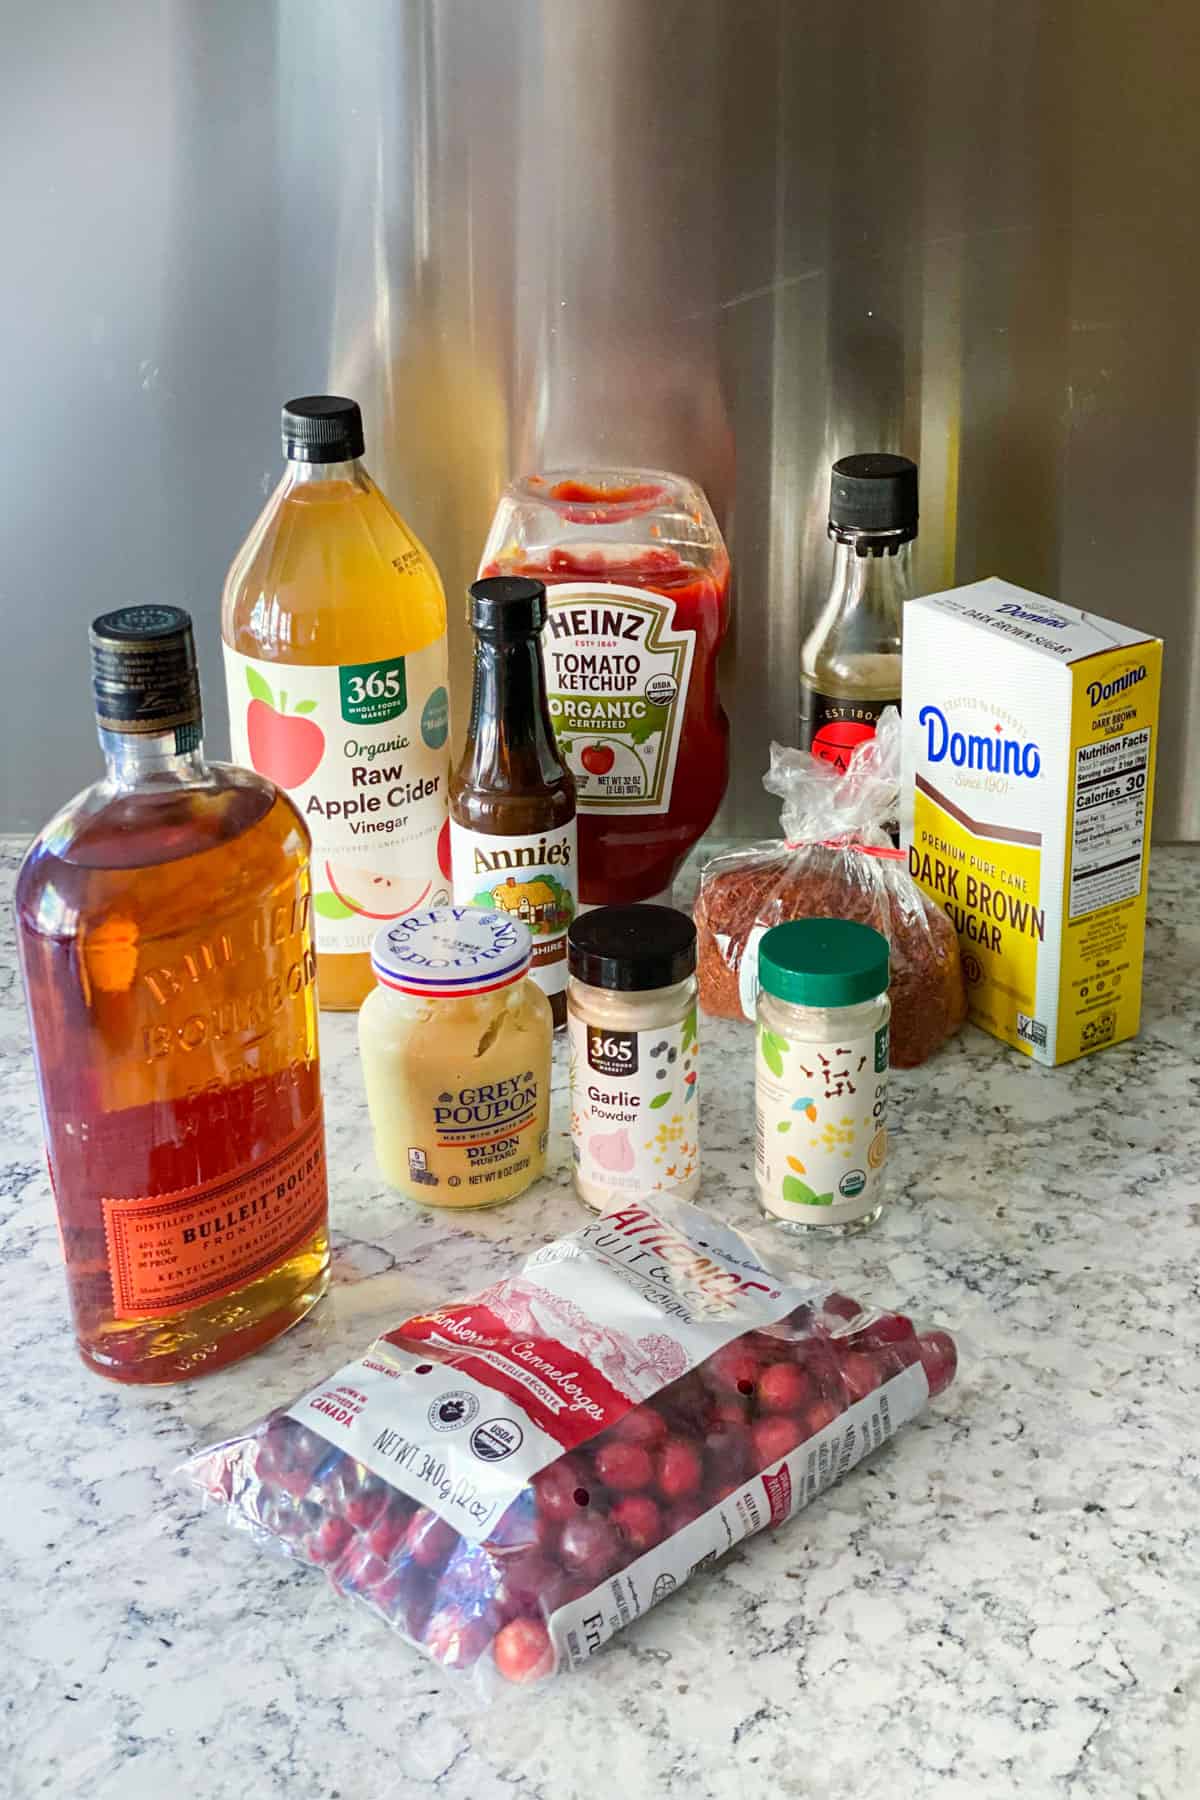 ingredients for cranberry bourbon bbq sauce sitting on a white countertop: a bottle of bourbon, bottle of ketchup, bag of fresh cranberries, bottle of cider vinegar, containers of garlic powder and onion powder, box of brown sugar.